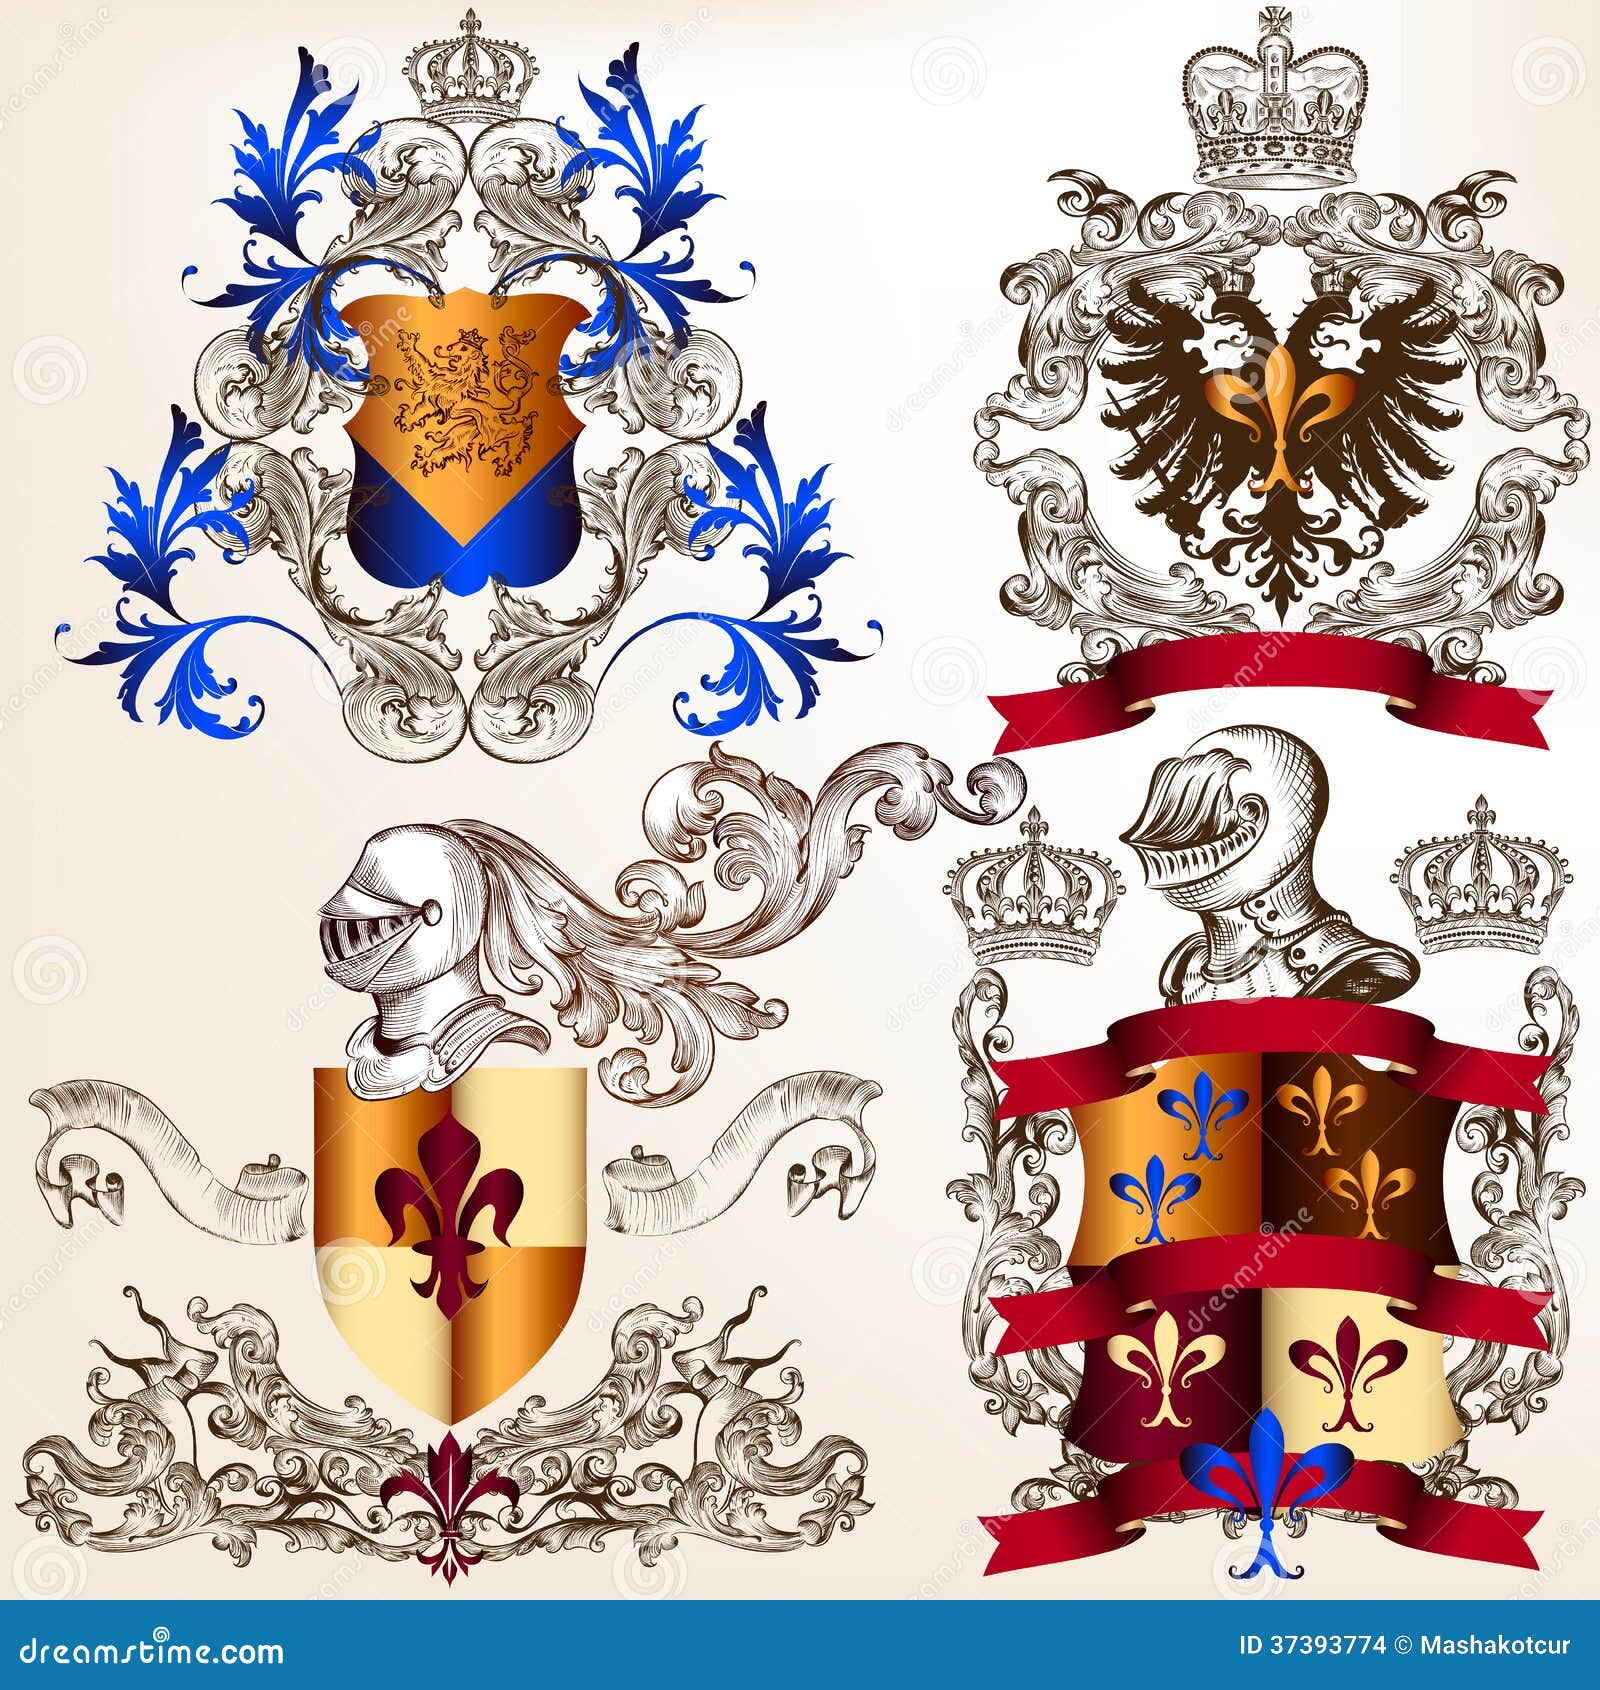 heraldic clipart collection - photo #49